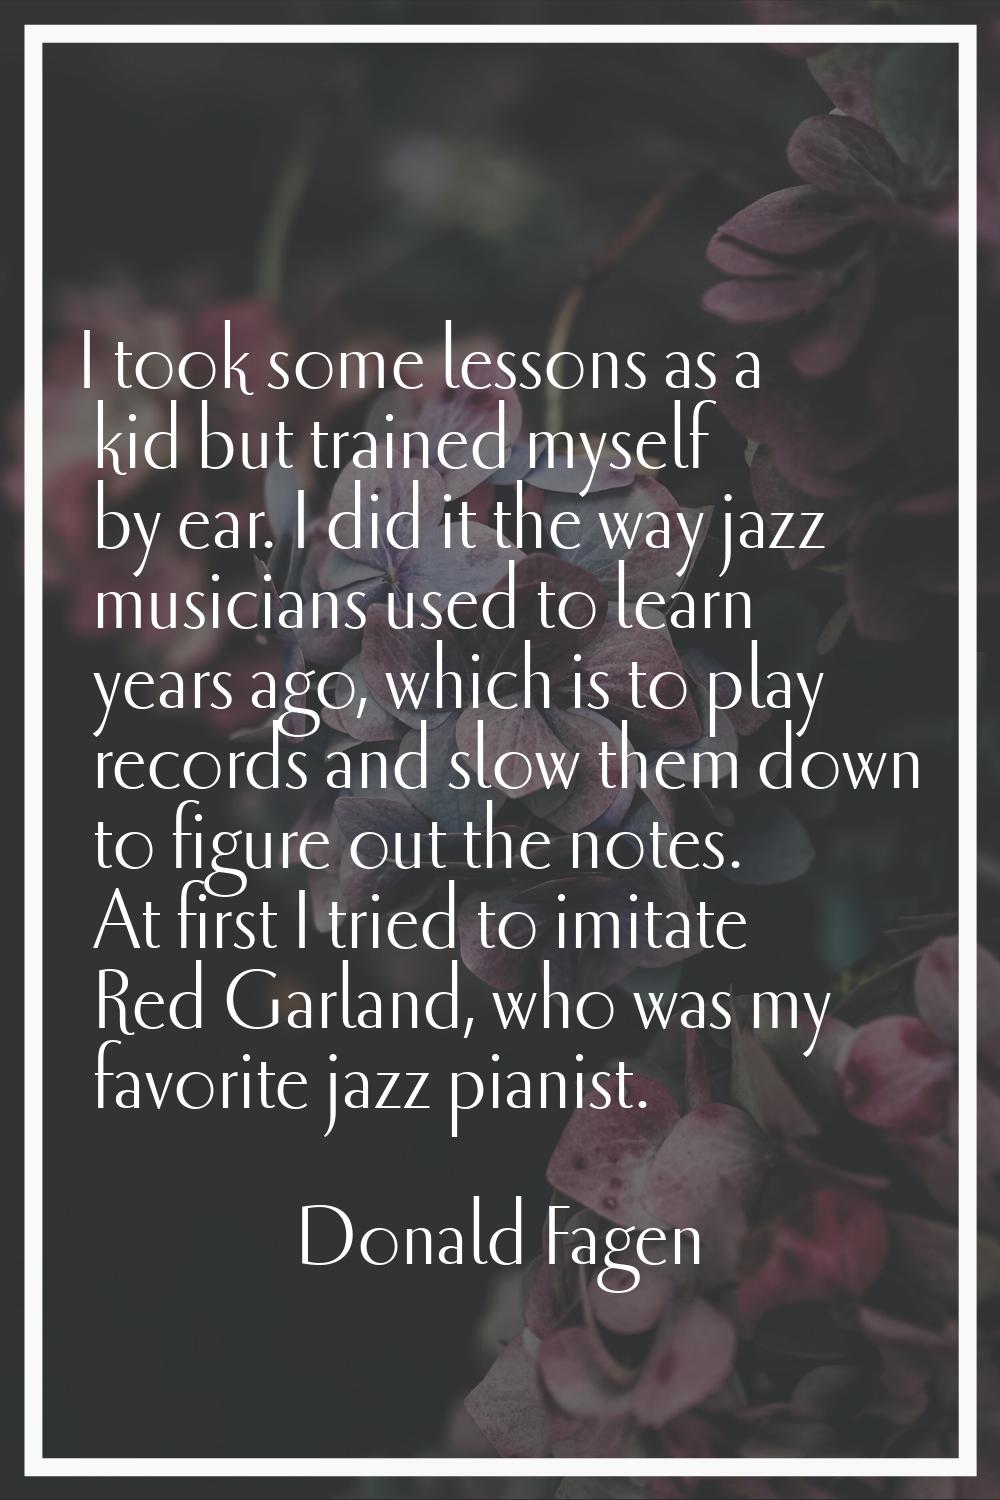 I took some lessons as a kid but trained myself by ear. I did it the way jazz musicians used to lea